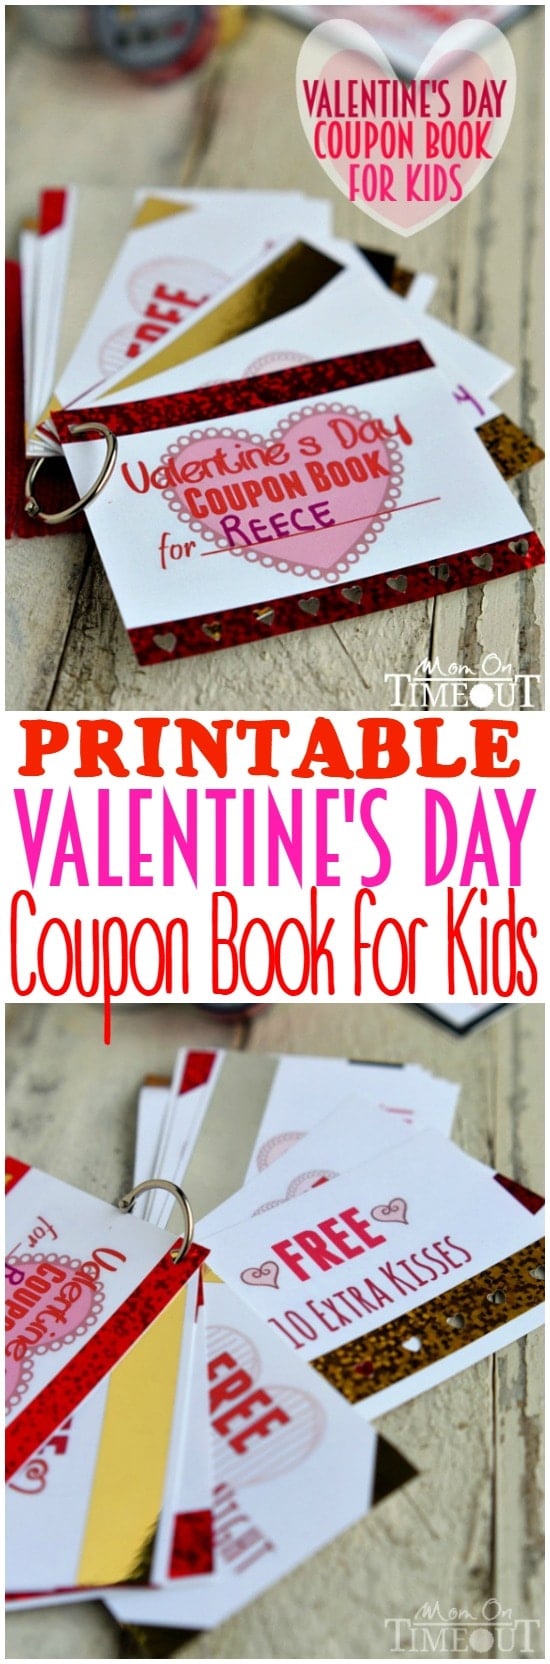 Treat your little sweetheart to a Printable Valentine's Day Coupon Book for Kids! Printable coupons for family movie night, no chores, pizza for dinner and so much more! | MomOnTimeout.com | #ValentinesDay #craft #ScotchEXP